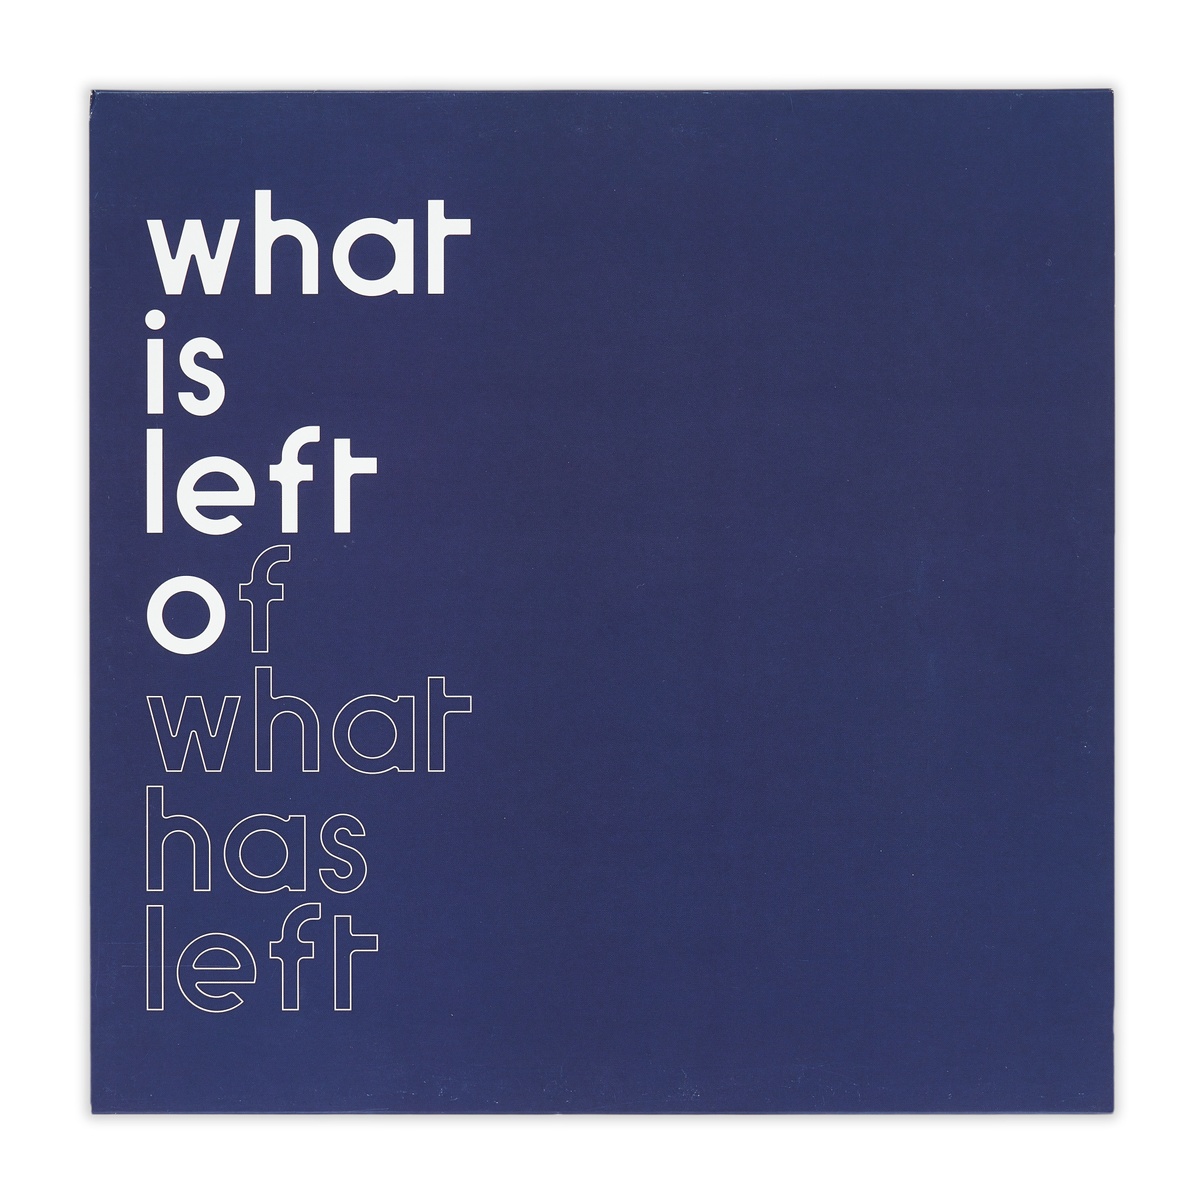 Photograph of the cover of Nothing to Commit Records and CCS Bard College's 12" vinyl record 'what is left of what has left'.
